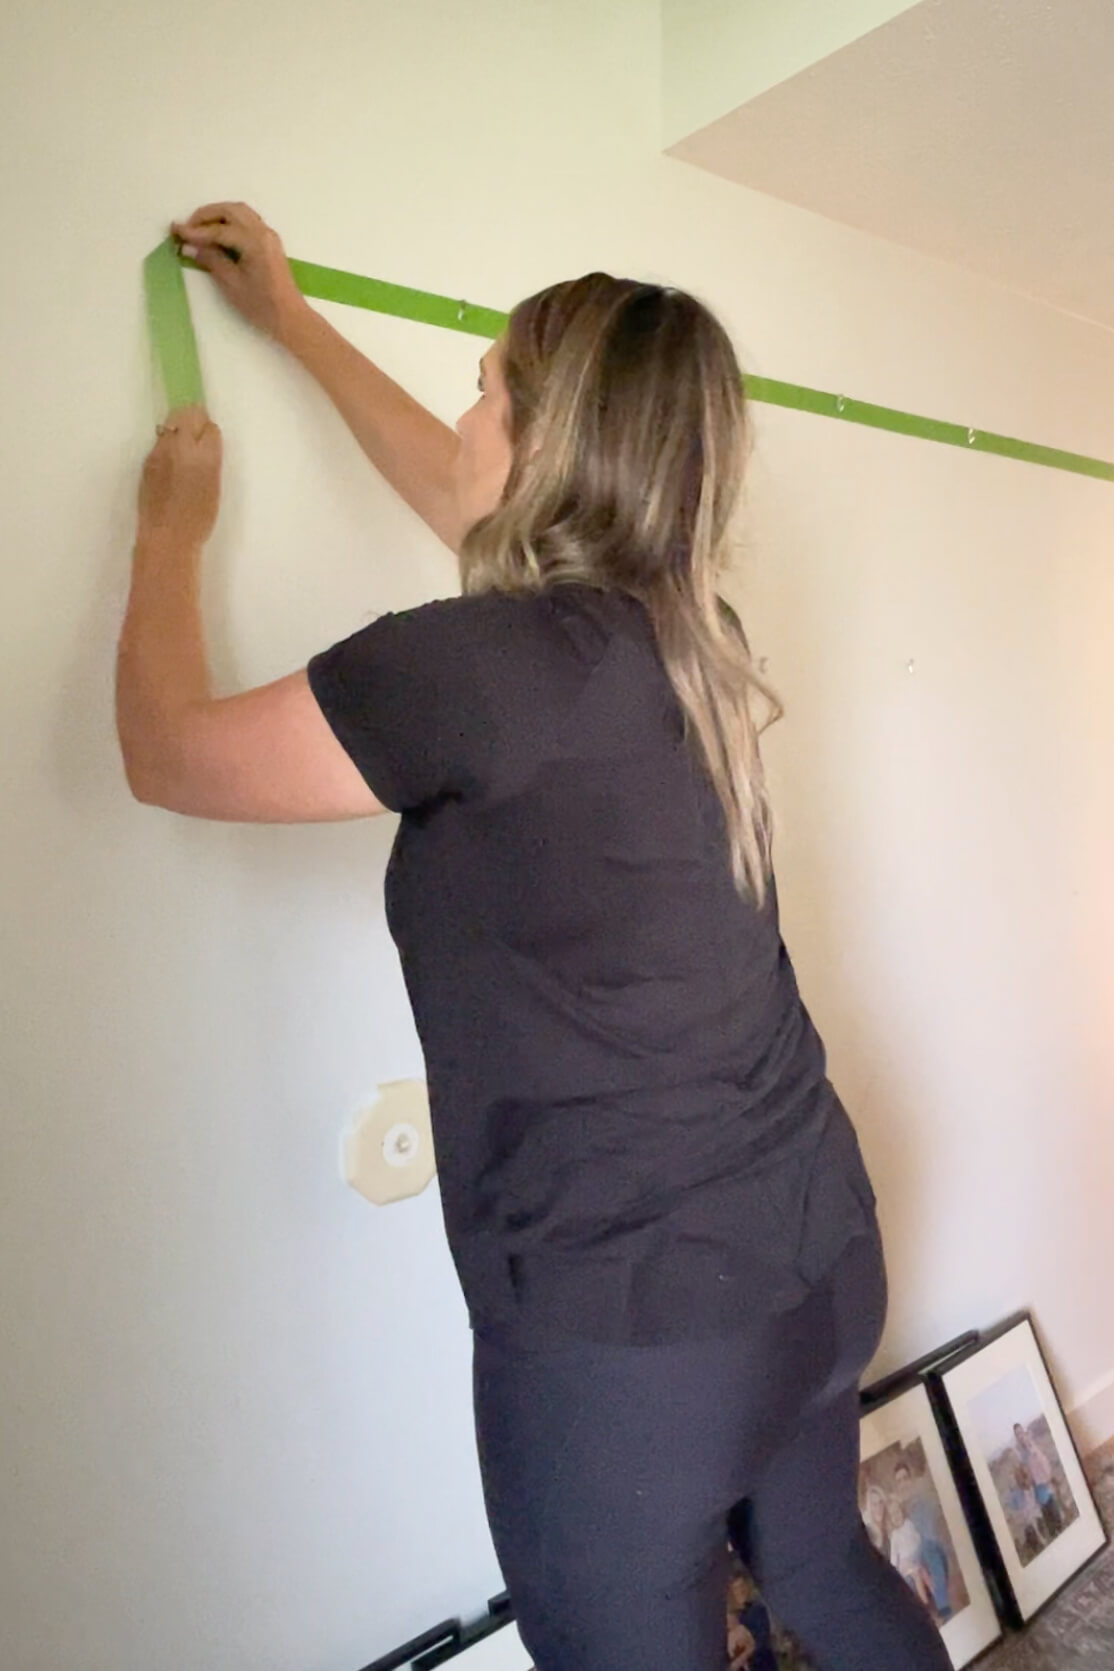 Taking tape off of wall when using it as a guide for hanging a gallery wall evenly.